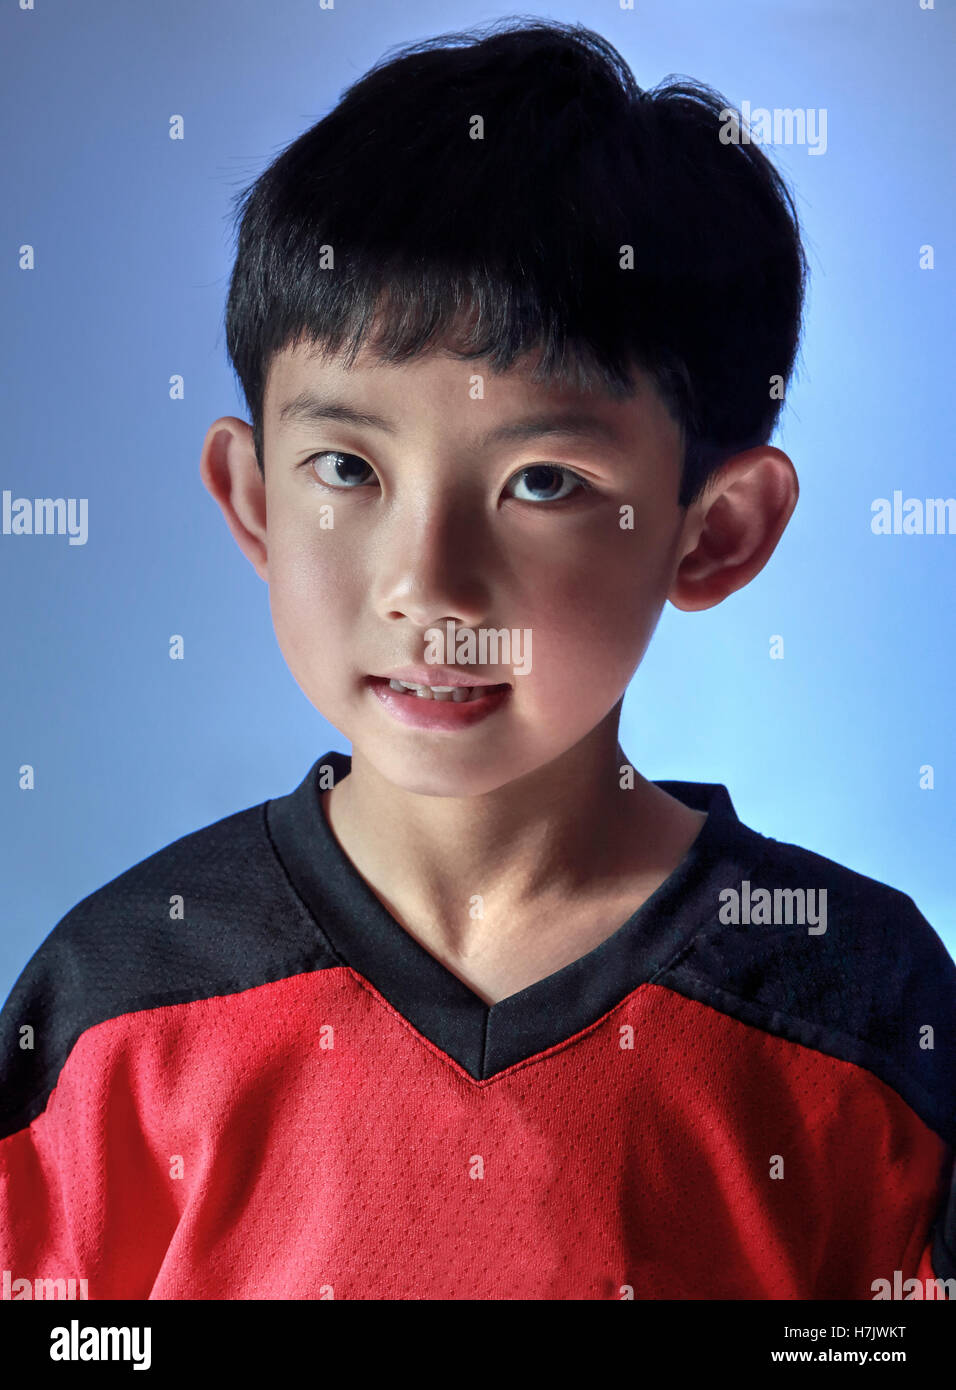 Asian boy wearing a sports jersey posing in studio, with special lighting to one side. Isolated on blue background Stock Photo